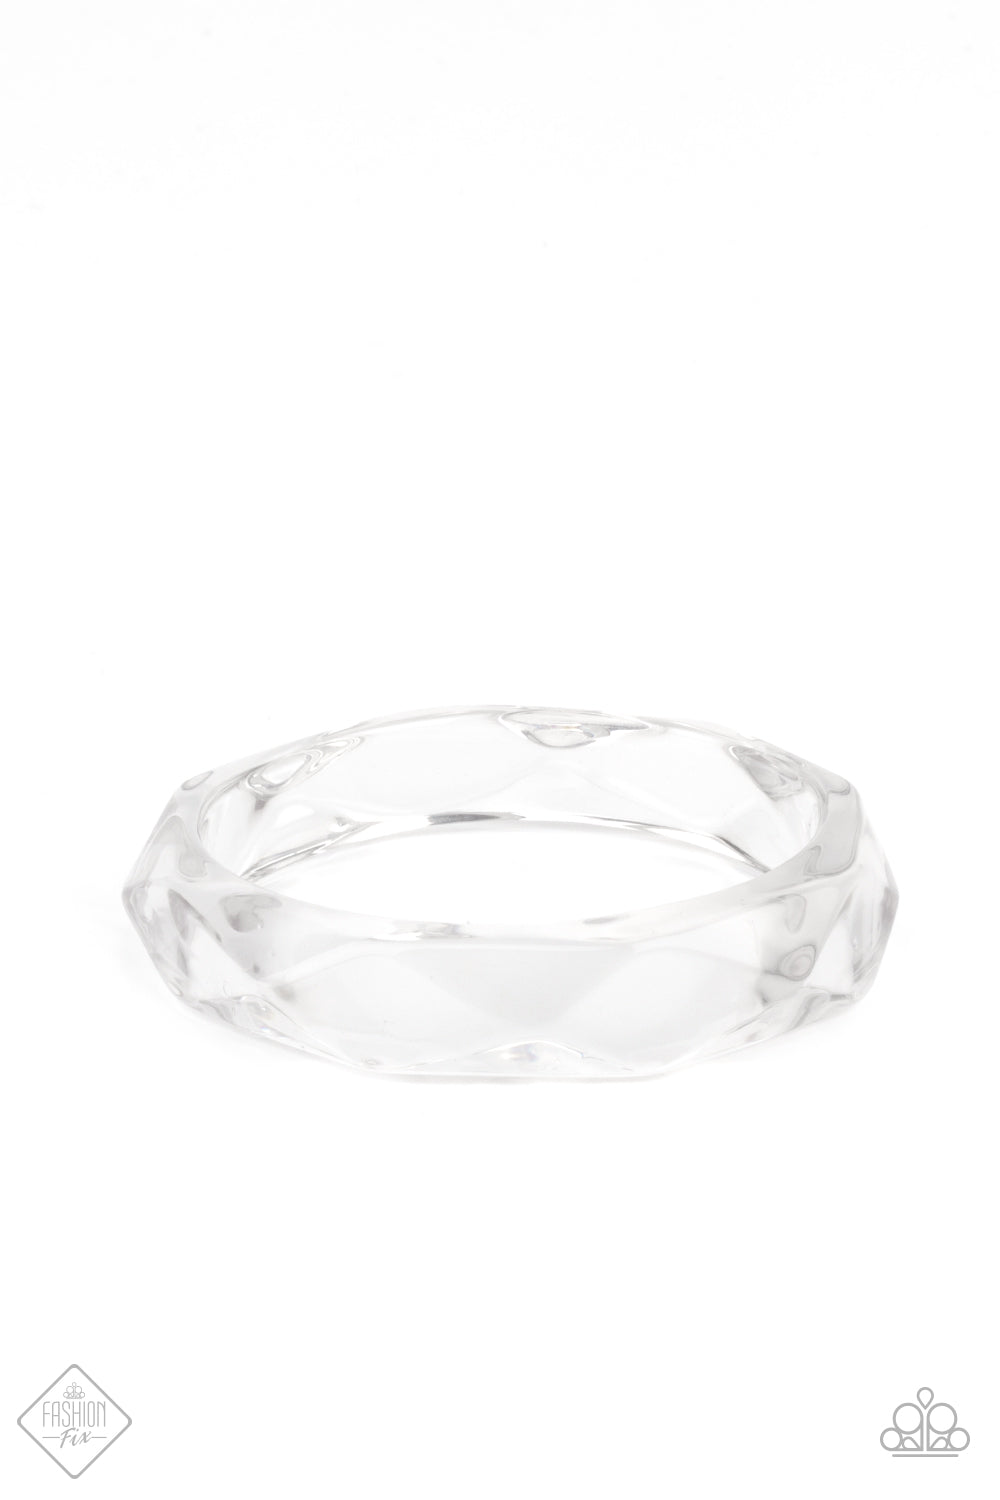 Paparazzi Accessories Clear-Cut Couture - White Bangle Bracelets featuring a flashy faceted surface, an oversized crystal-like acrylic bangle glides along the wrist, casting rainbow reflections with its glassy exterior.